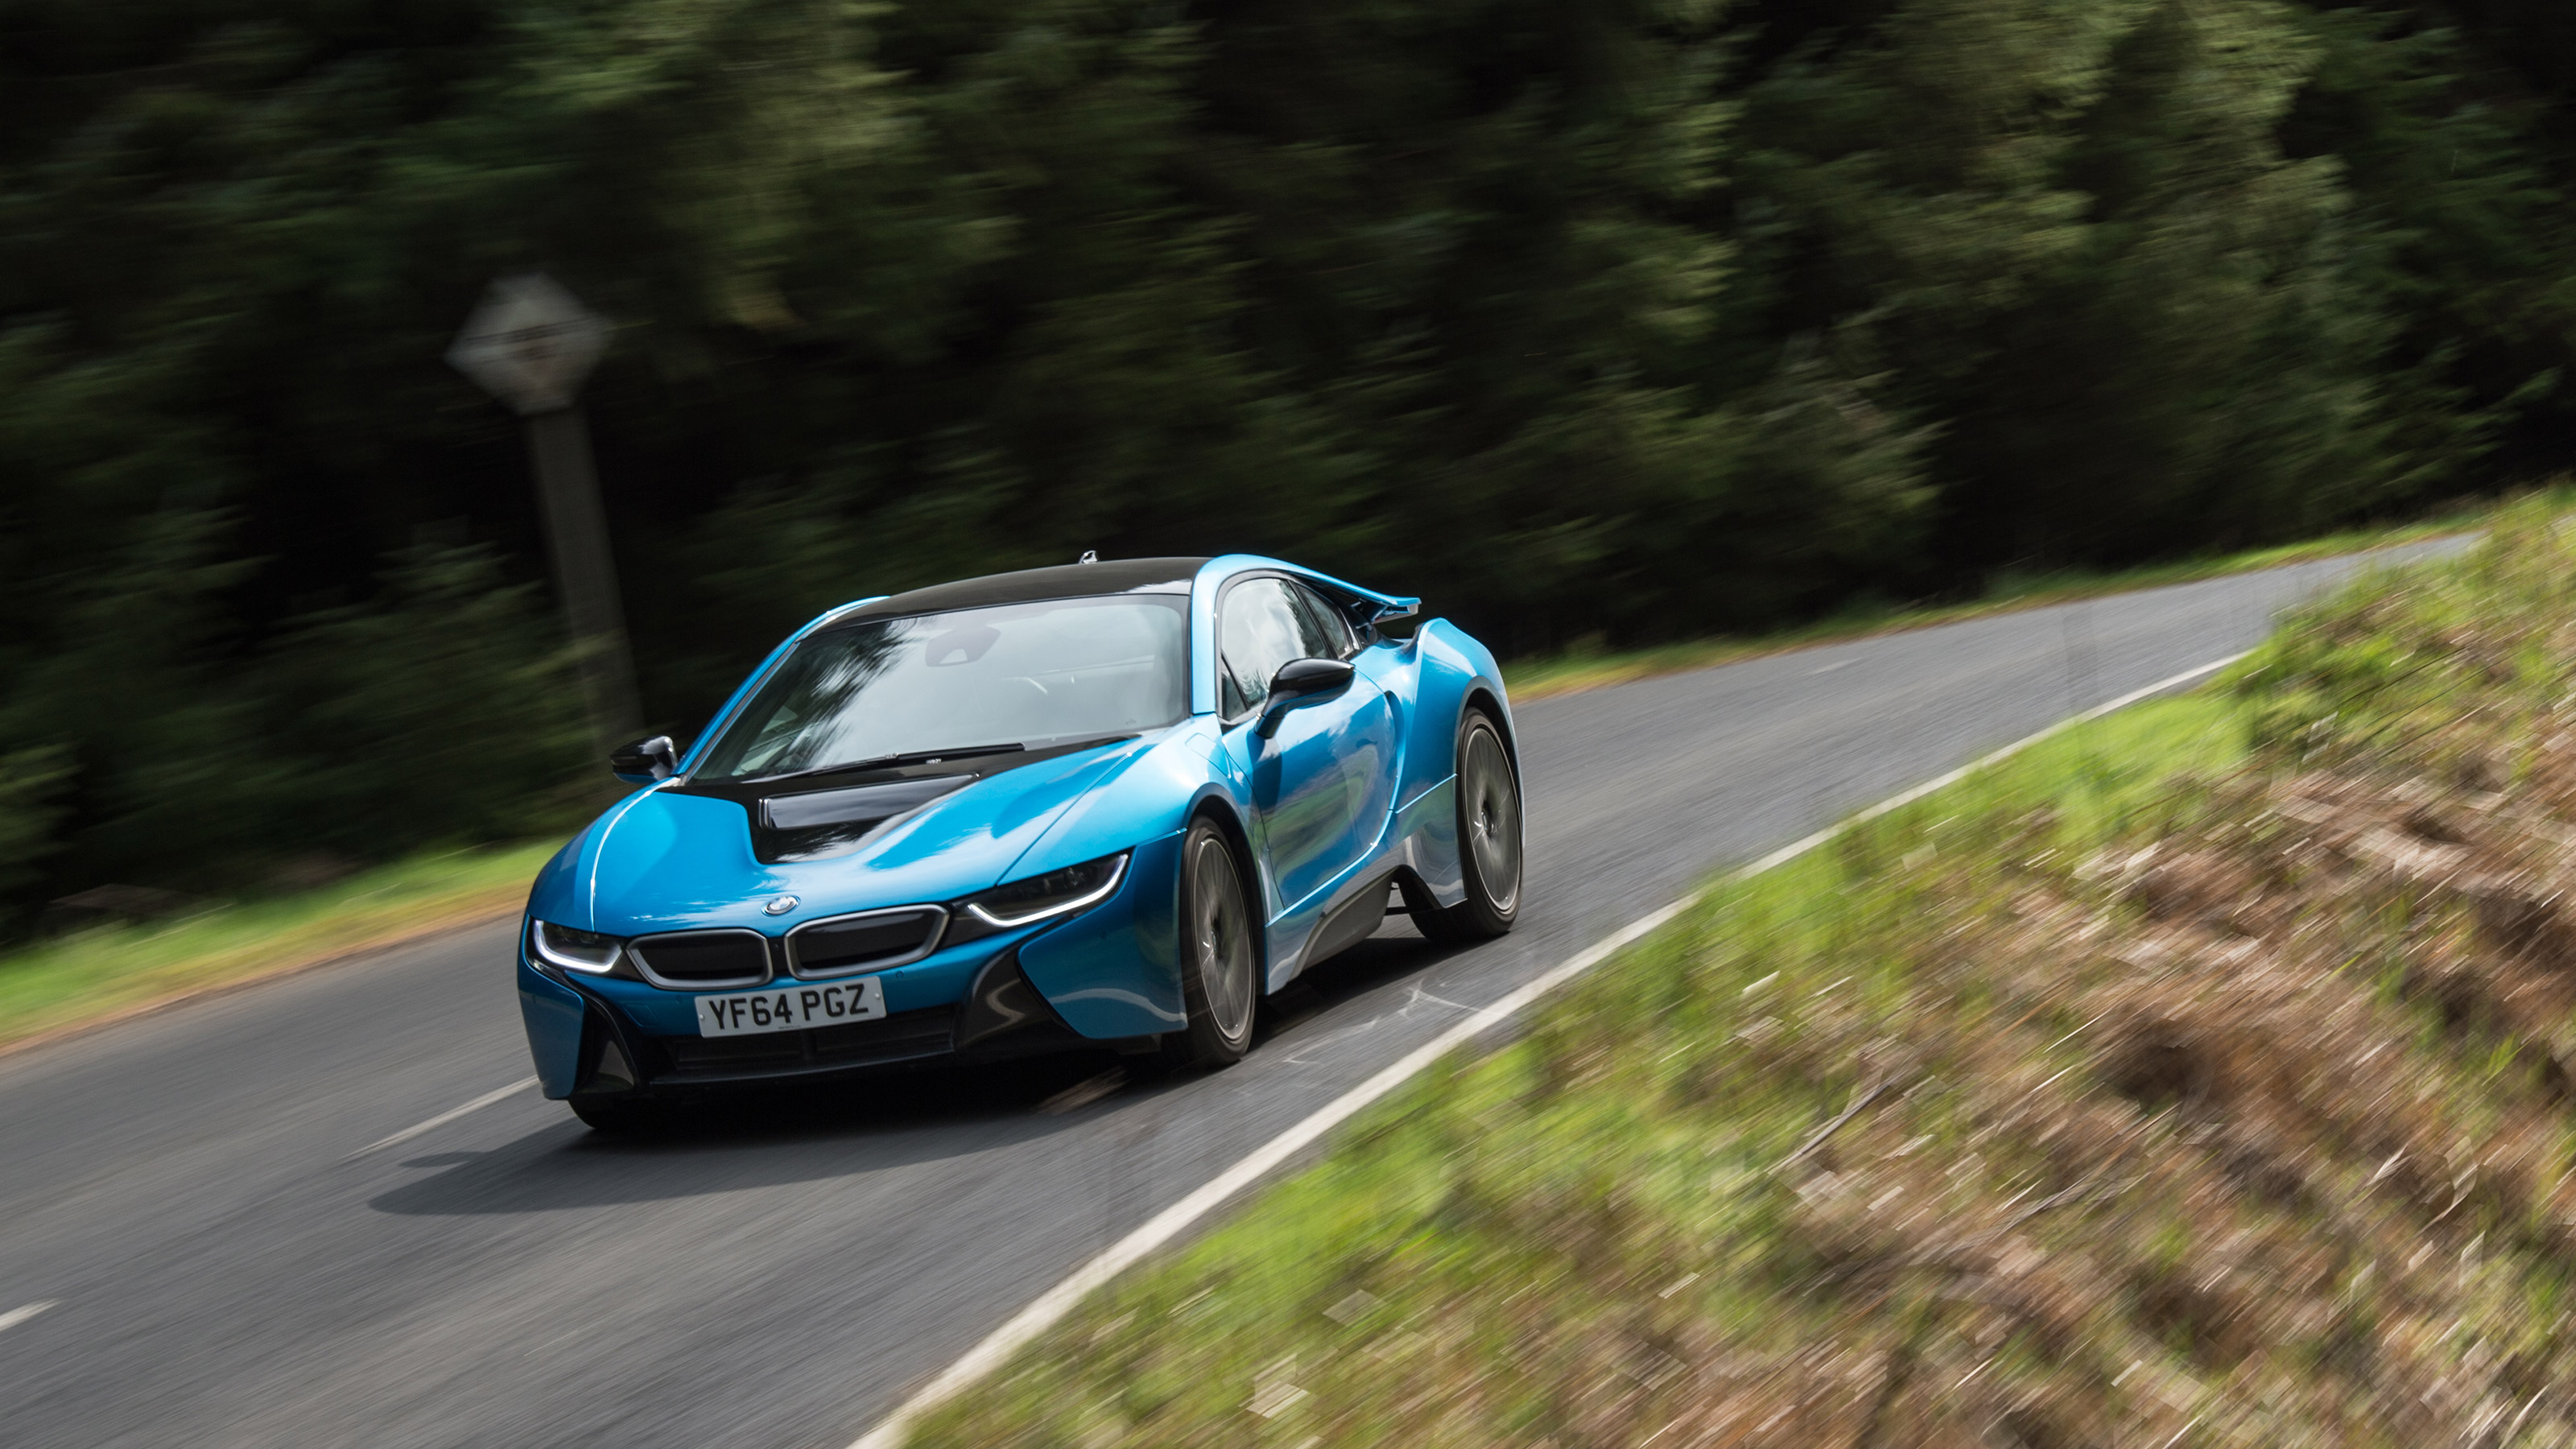 2019 BMW i8 Review, Pricing, and Specs